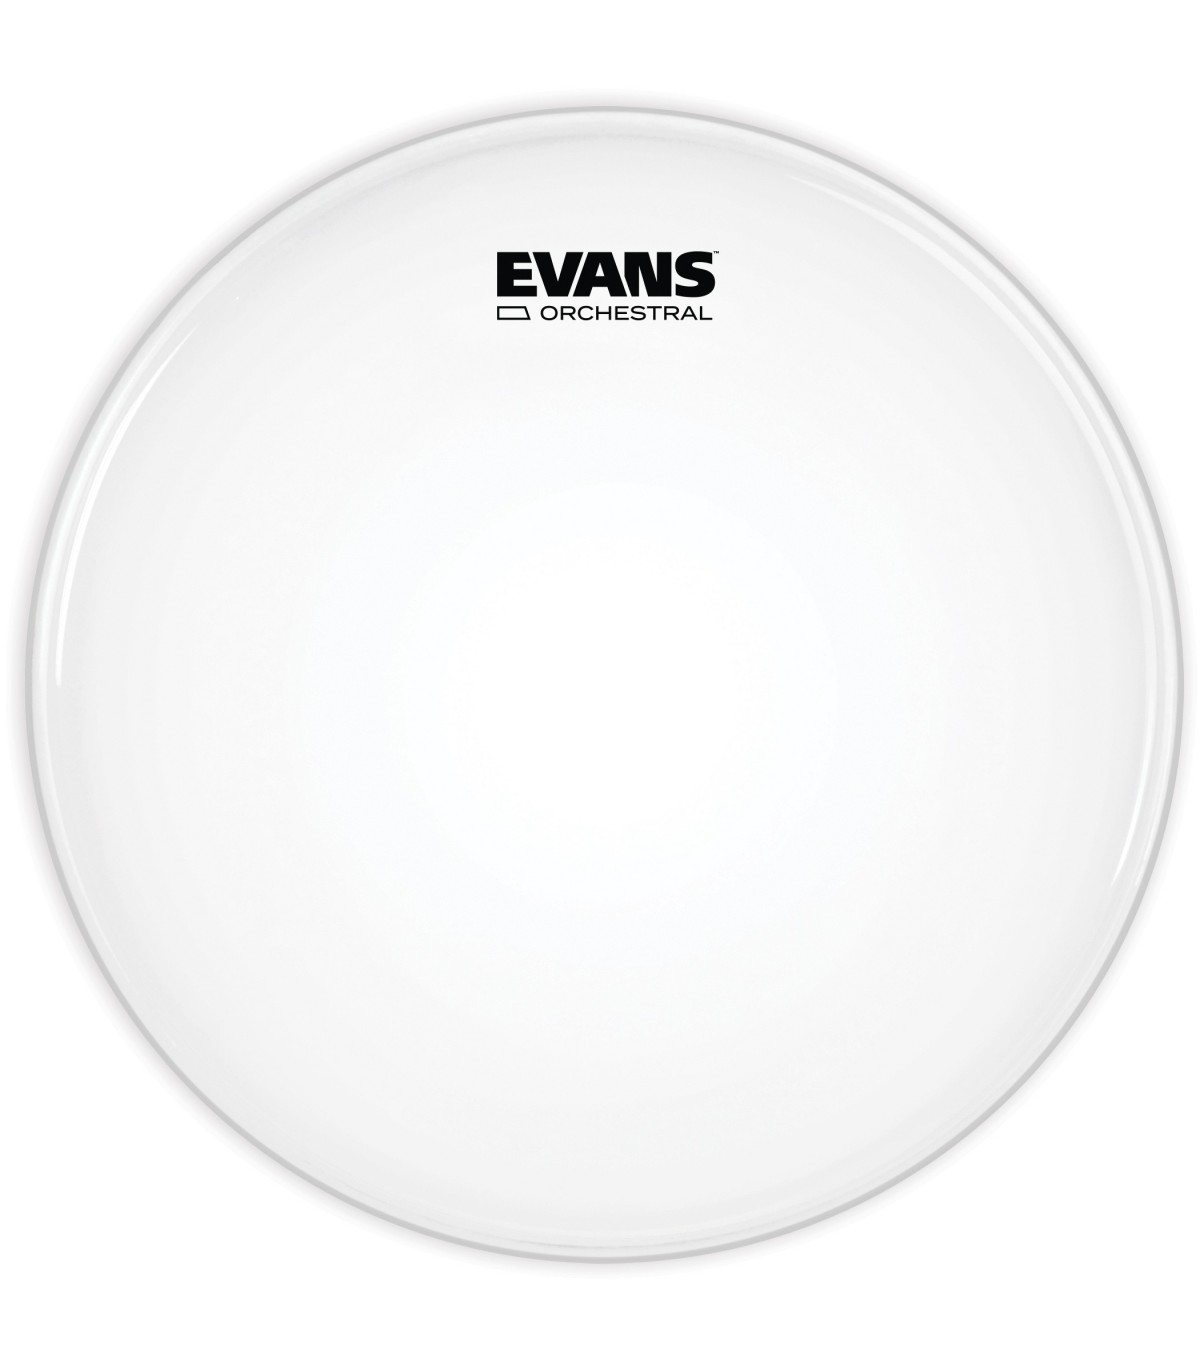 Evans Orchestral Coated White Snare Drum Head 14 Inch 